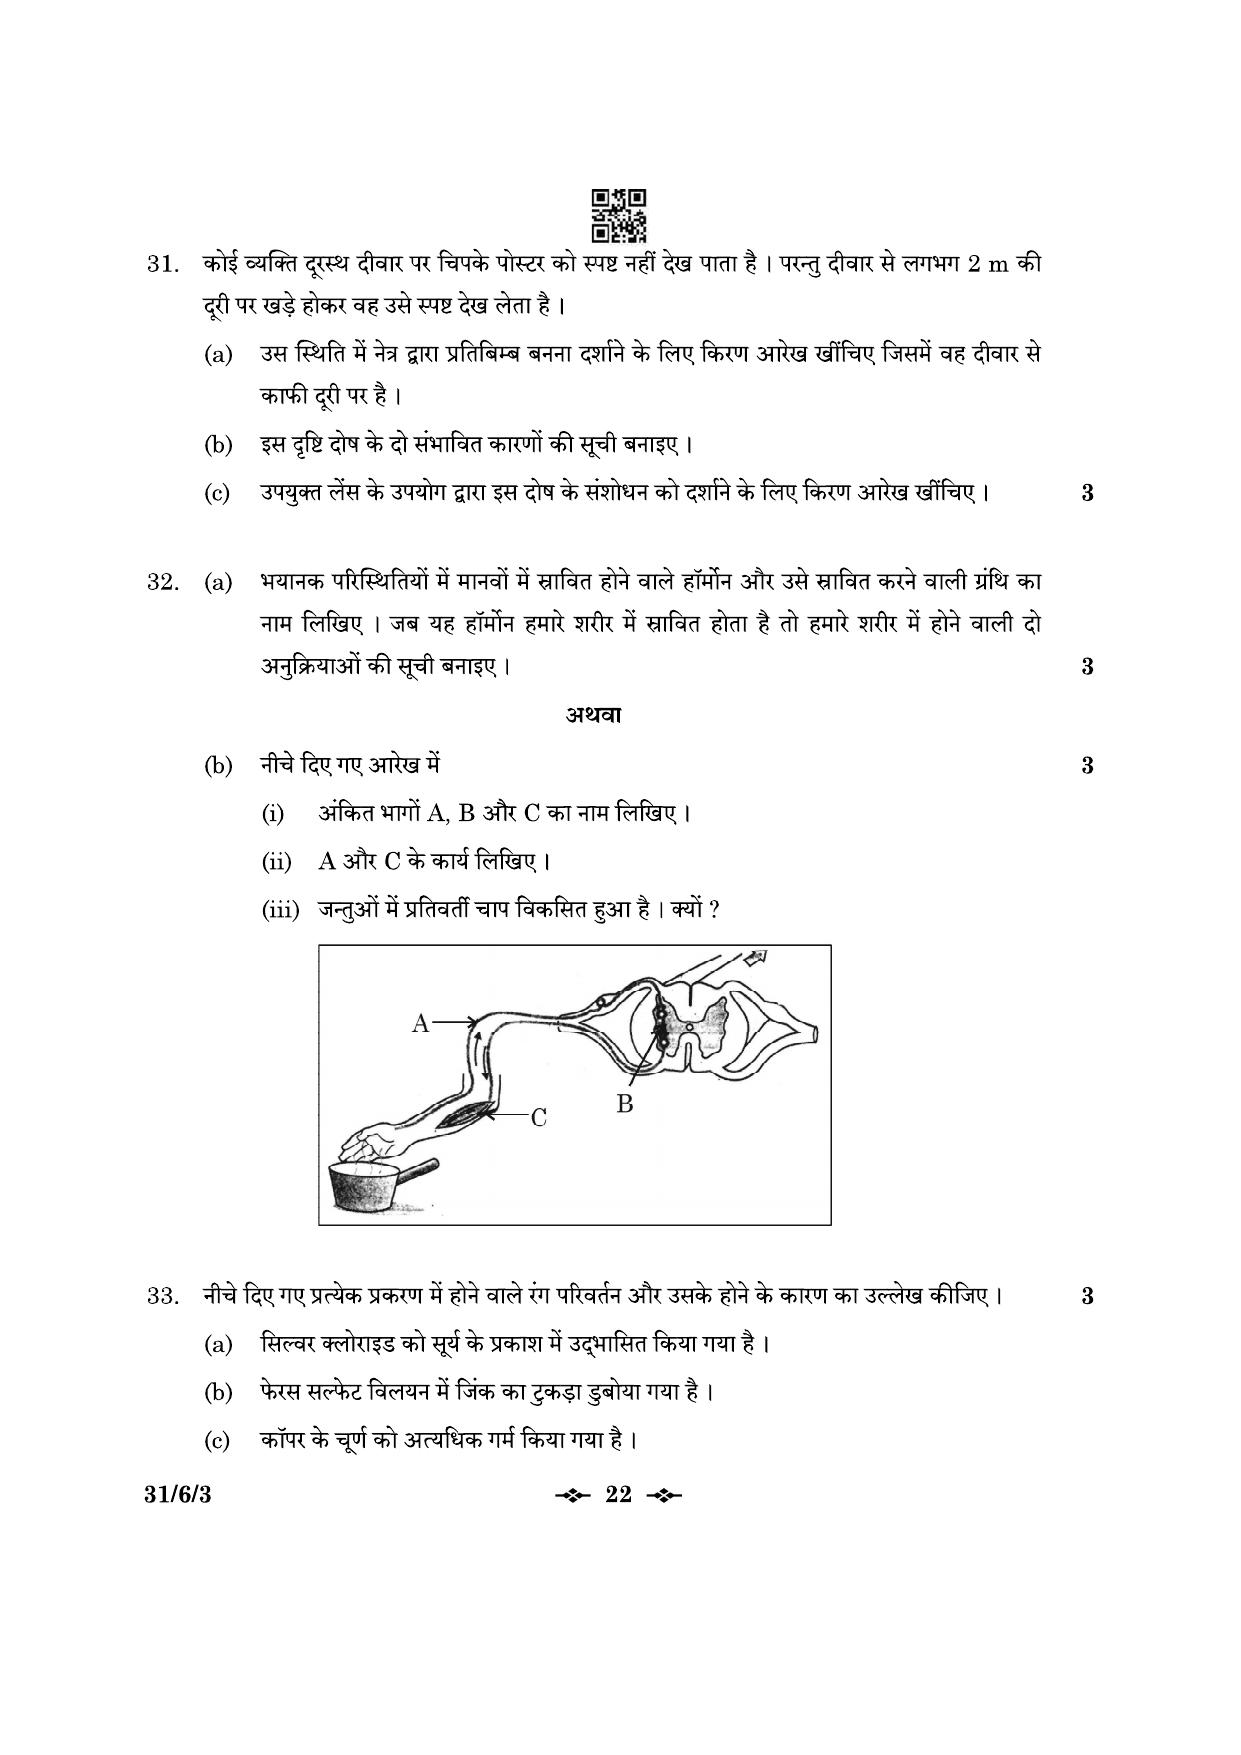 CBSE Class 10 31-6-3 Science 2023 Question Paper - Page 22